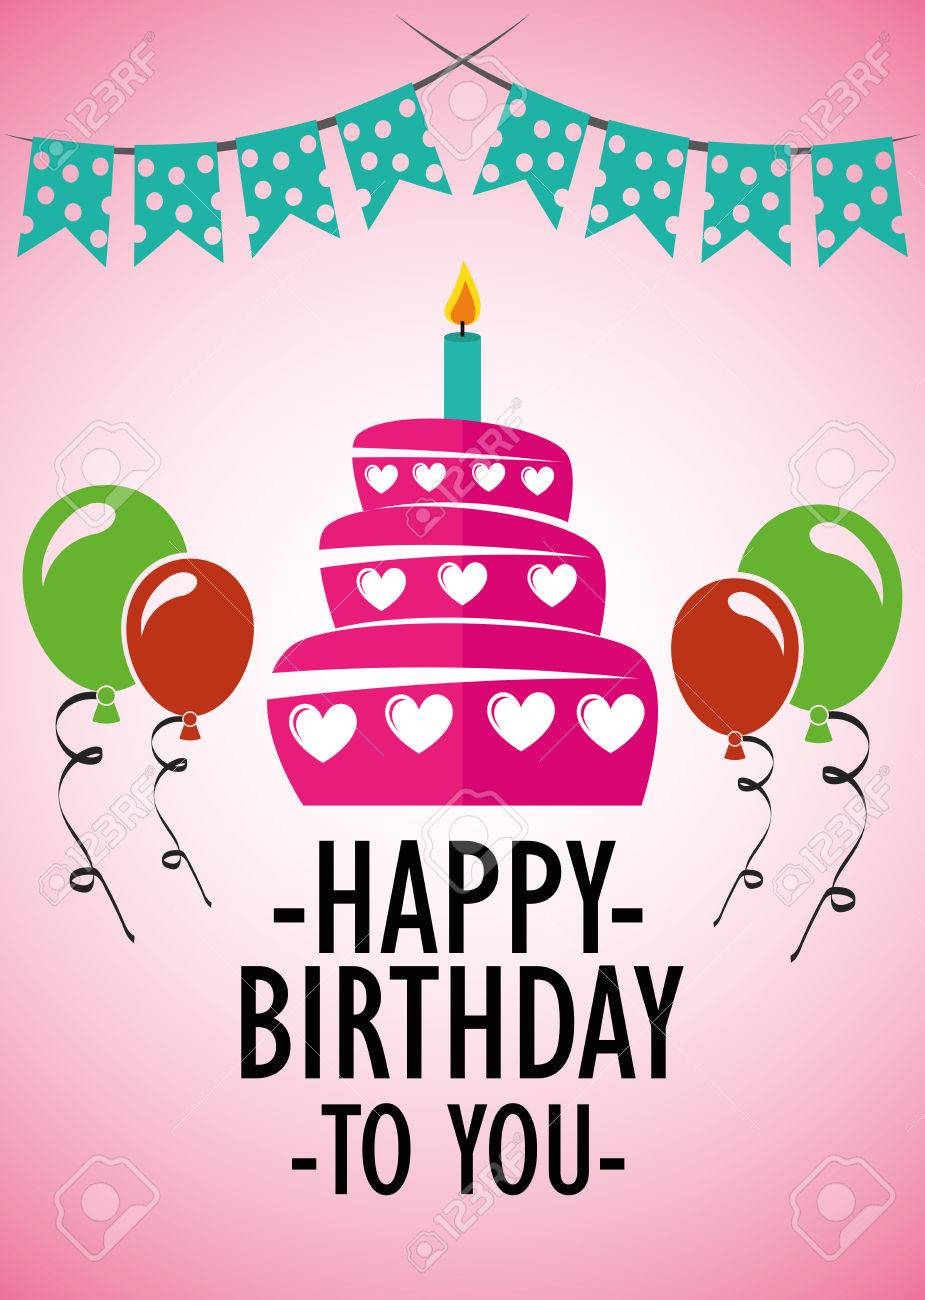 42927176-poster-card-illustration-graphic-vector-happy-birthday-to-you-for-different-purpose.jpg